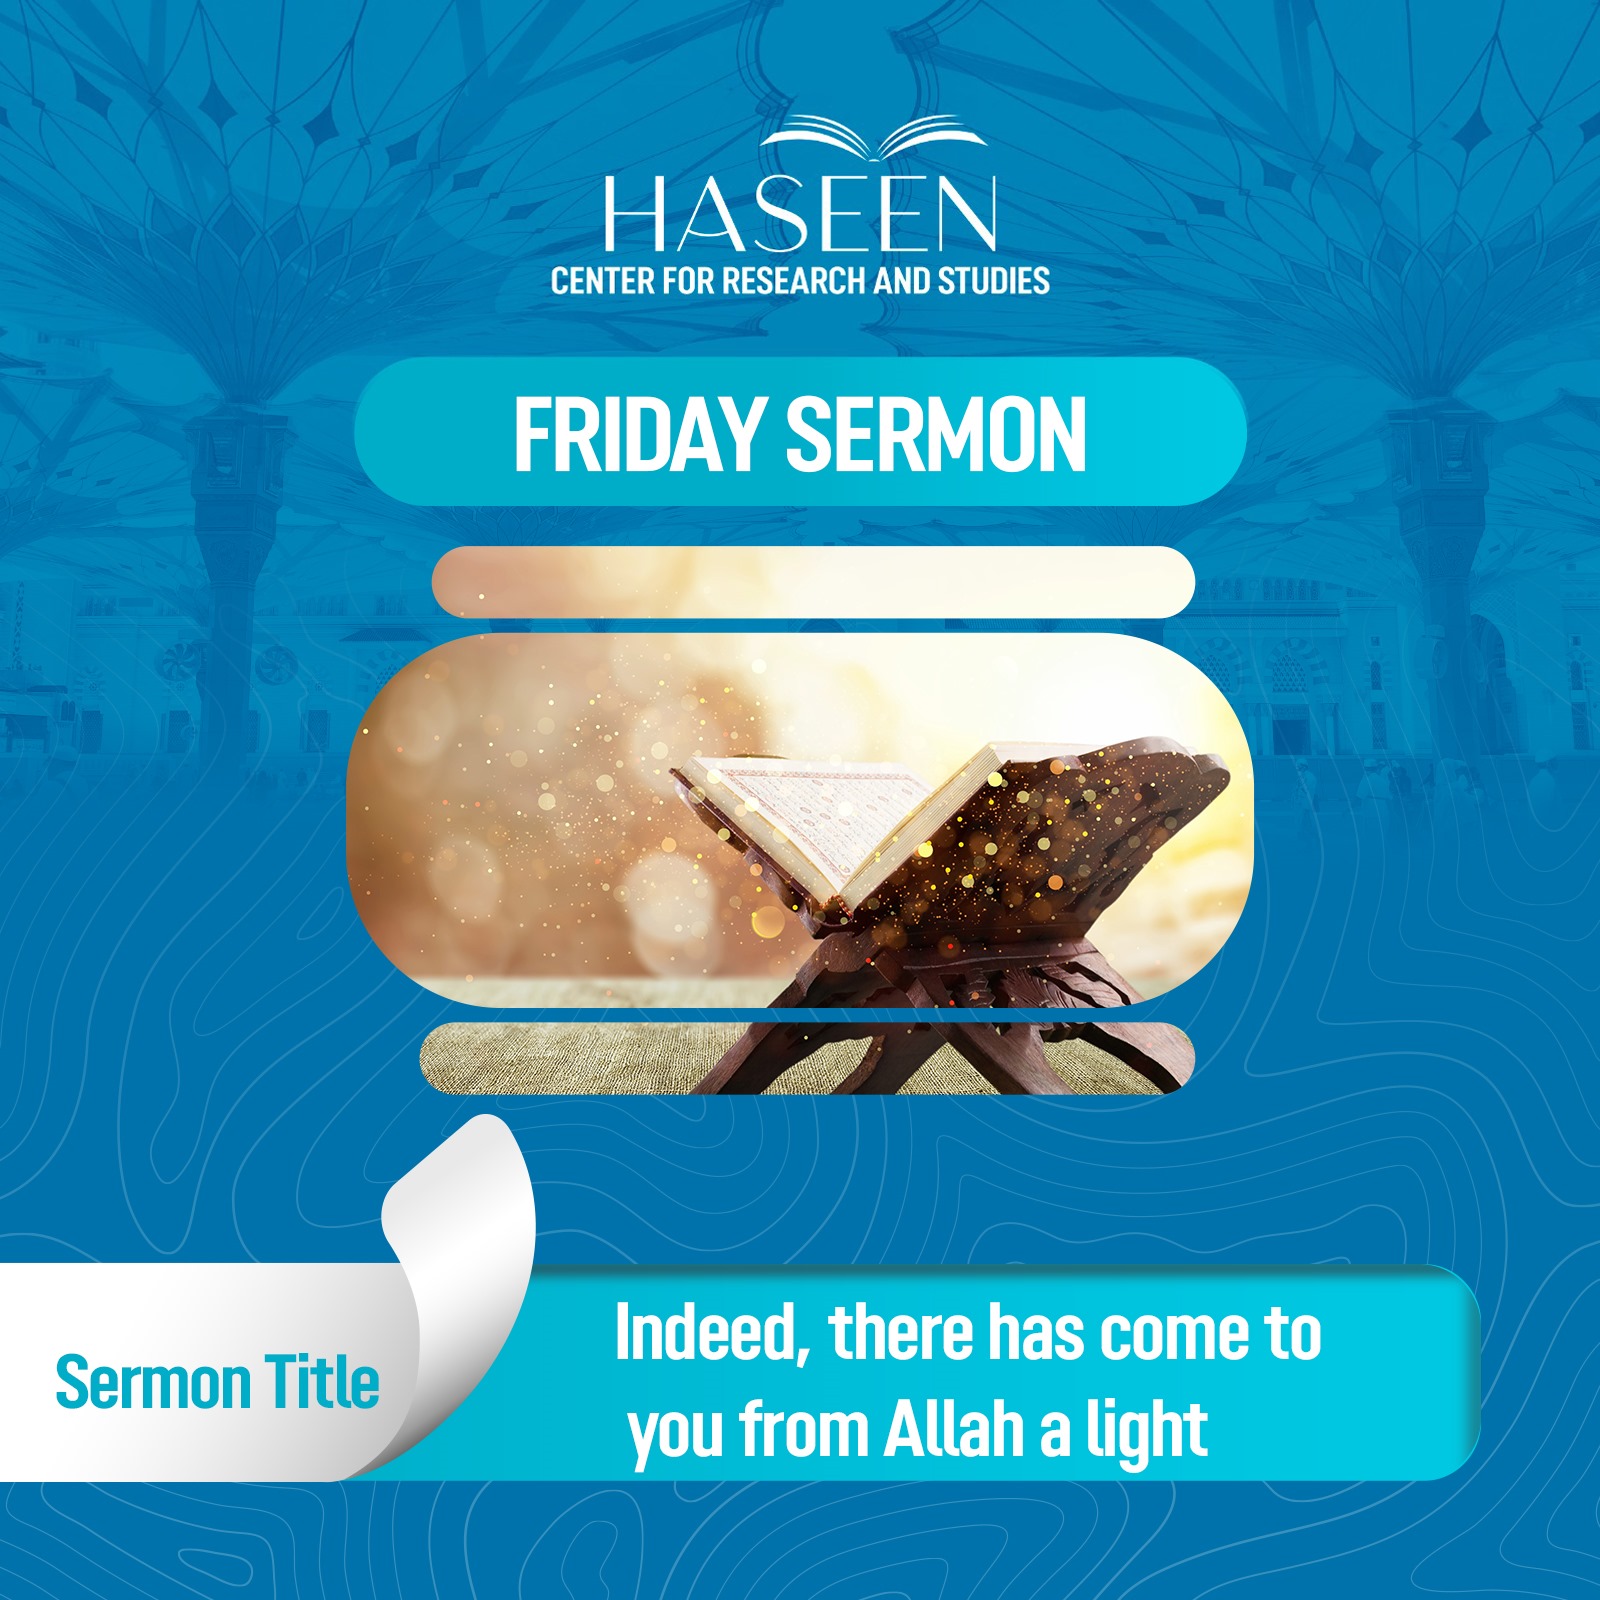 Title of the Sermon: Indeed, there has come to you from Allah a light"